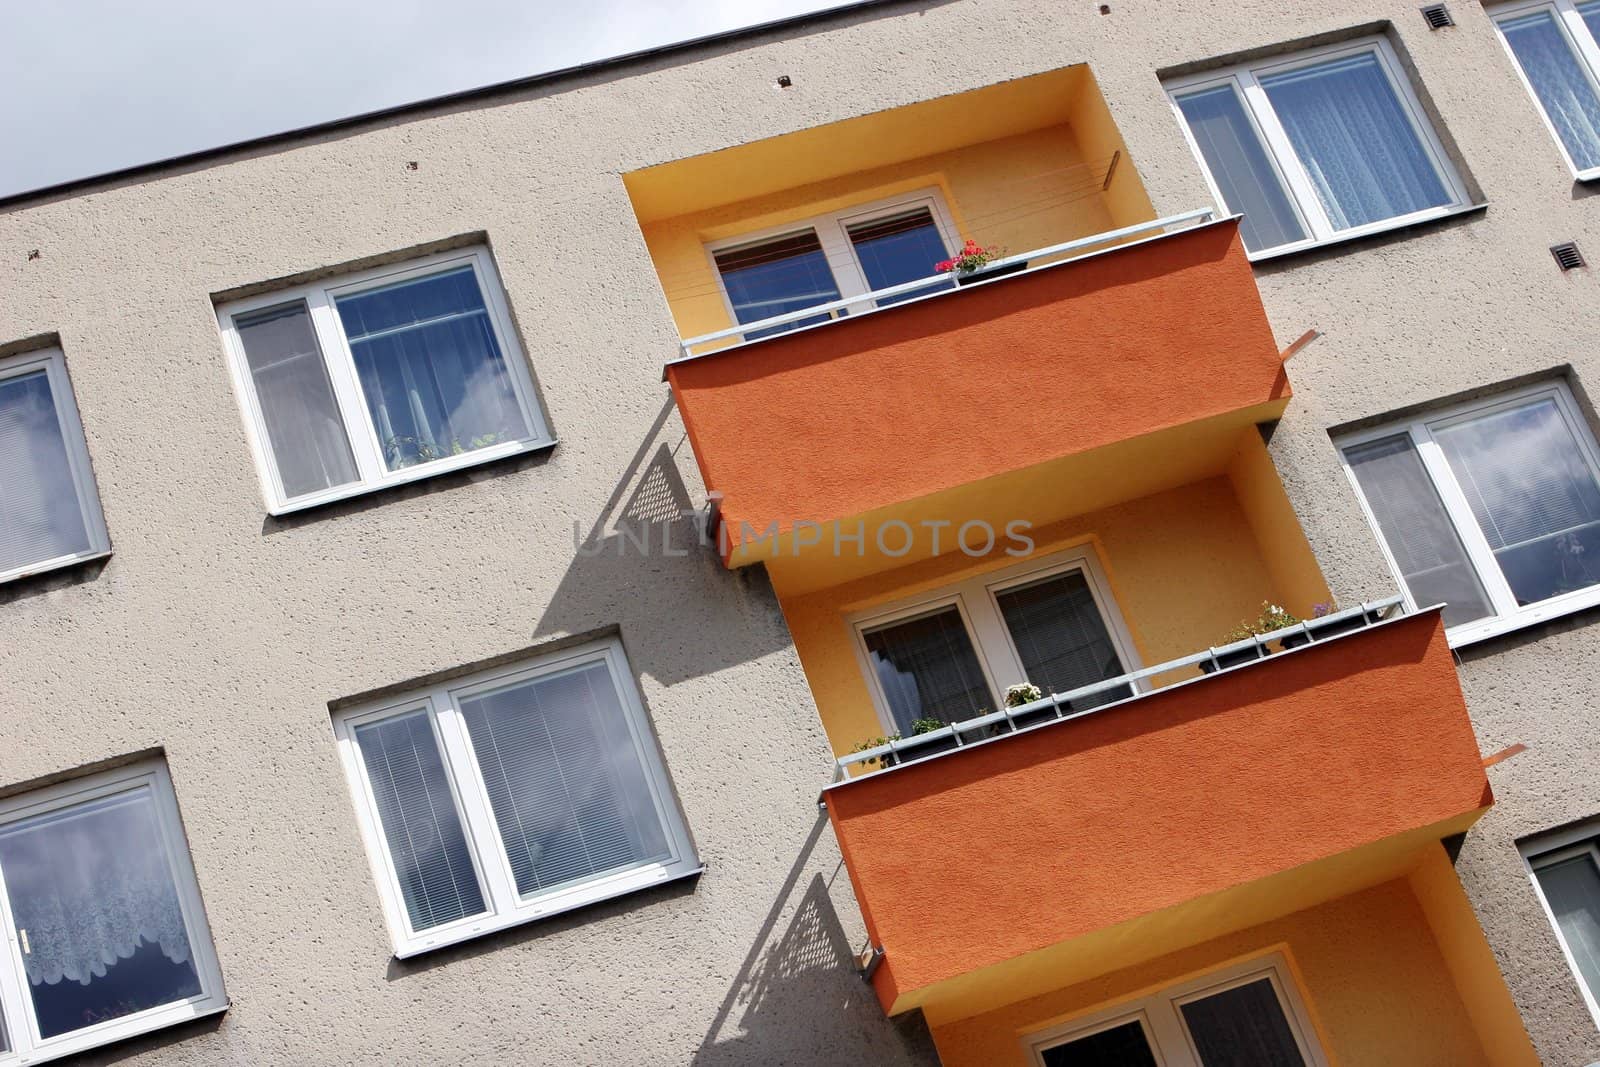 Detail of orange and yellow prefab house by haak78